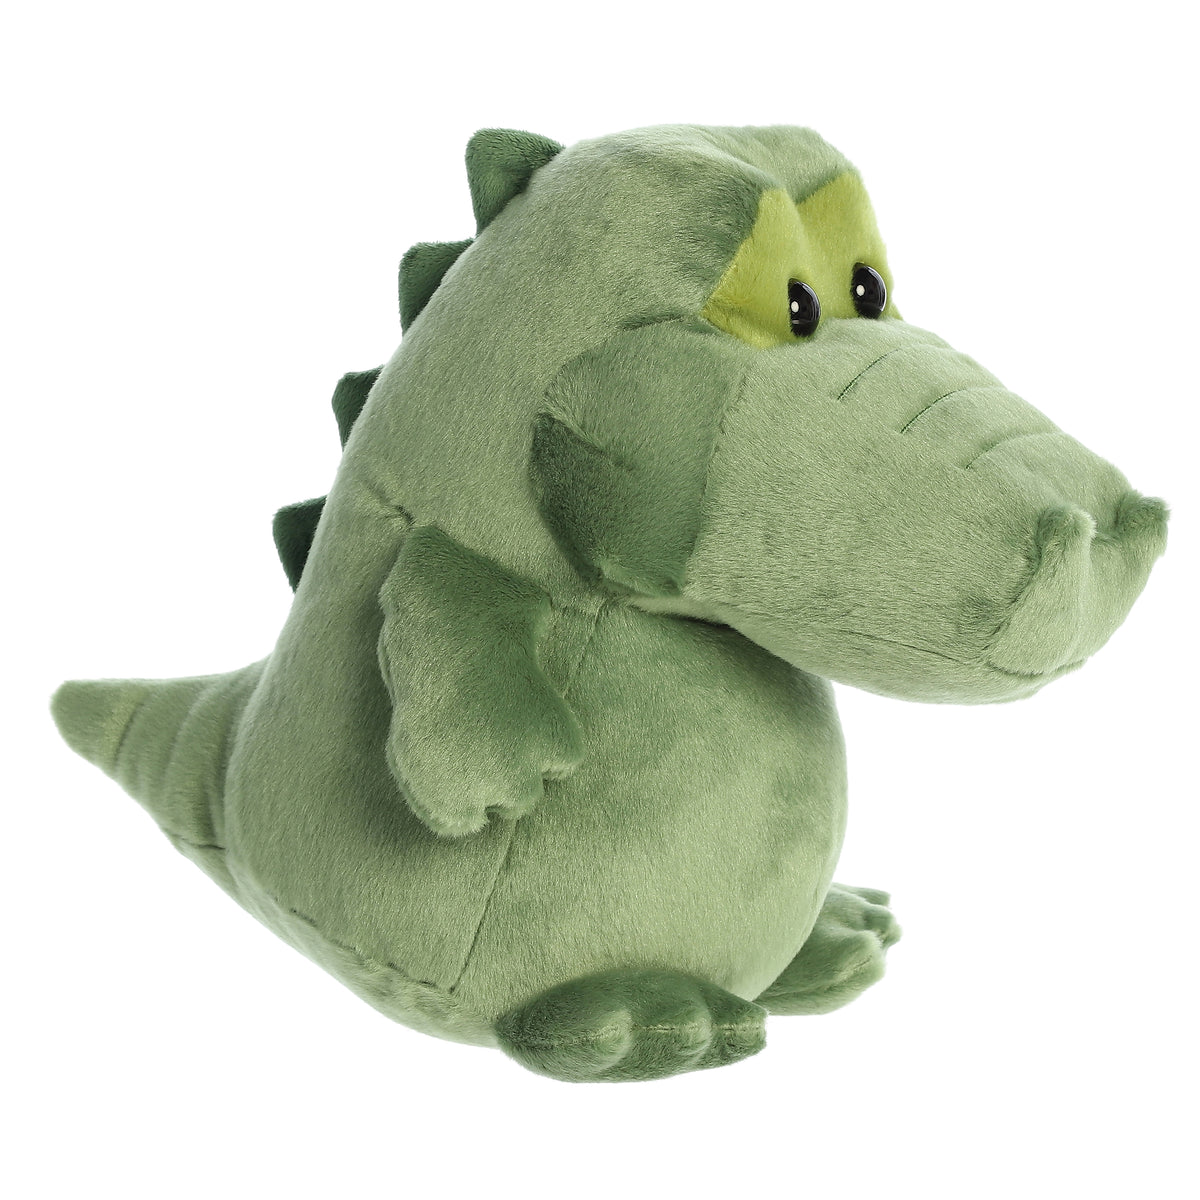 Alligator plush in vibrant green, featuring a big grin and cute webbed feet, from the Happy Hippo And Friends collection.